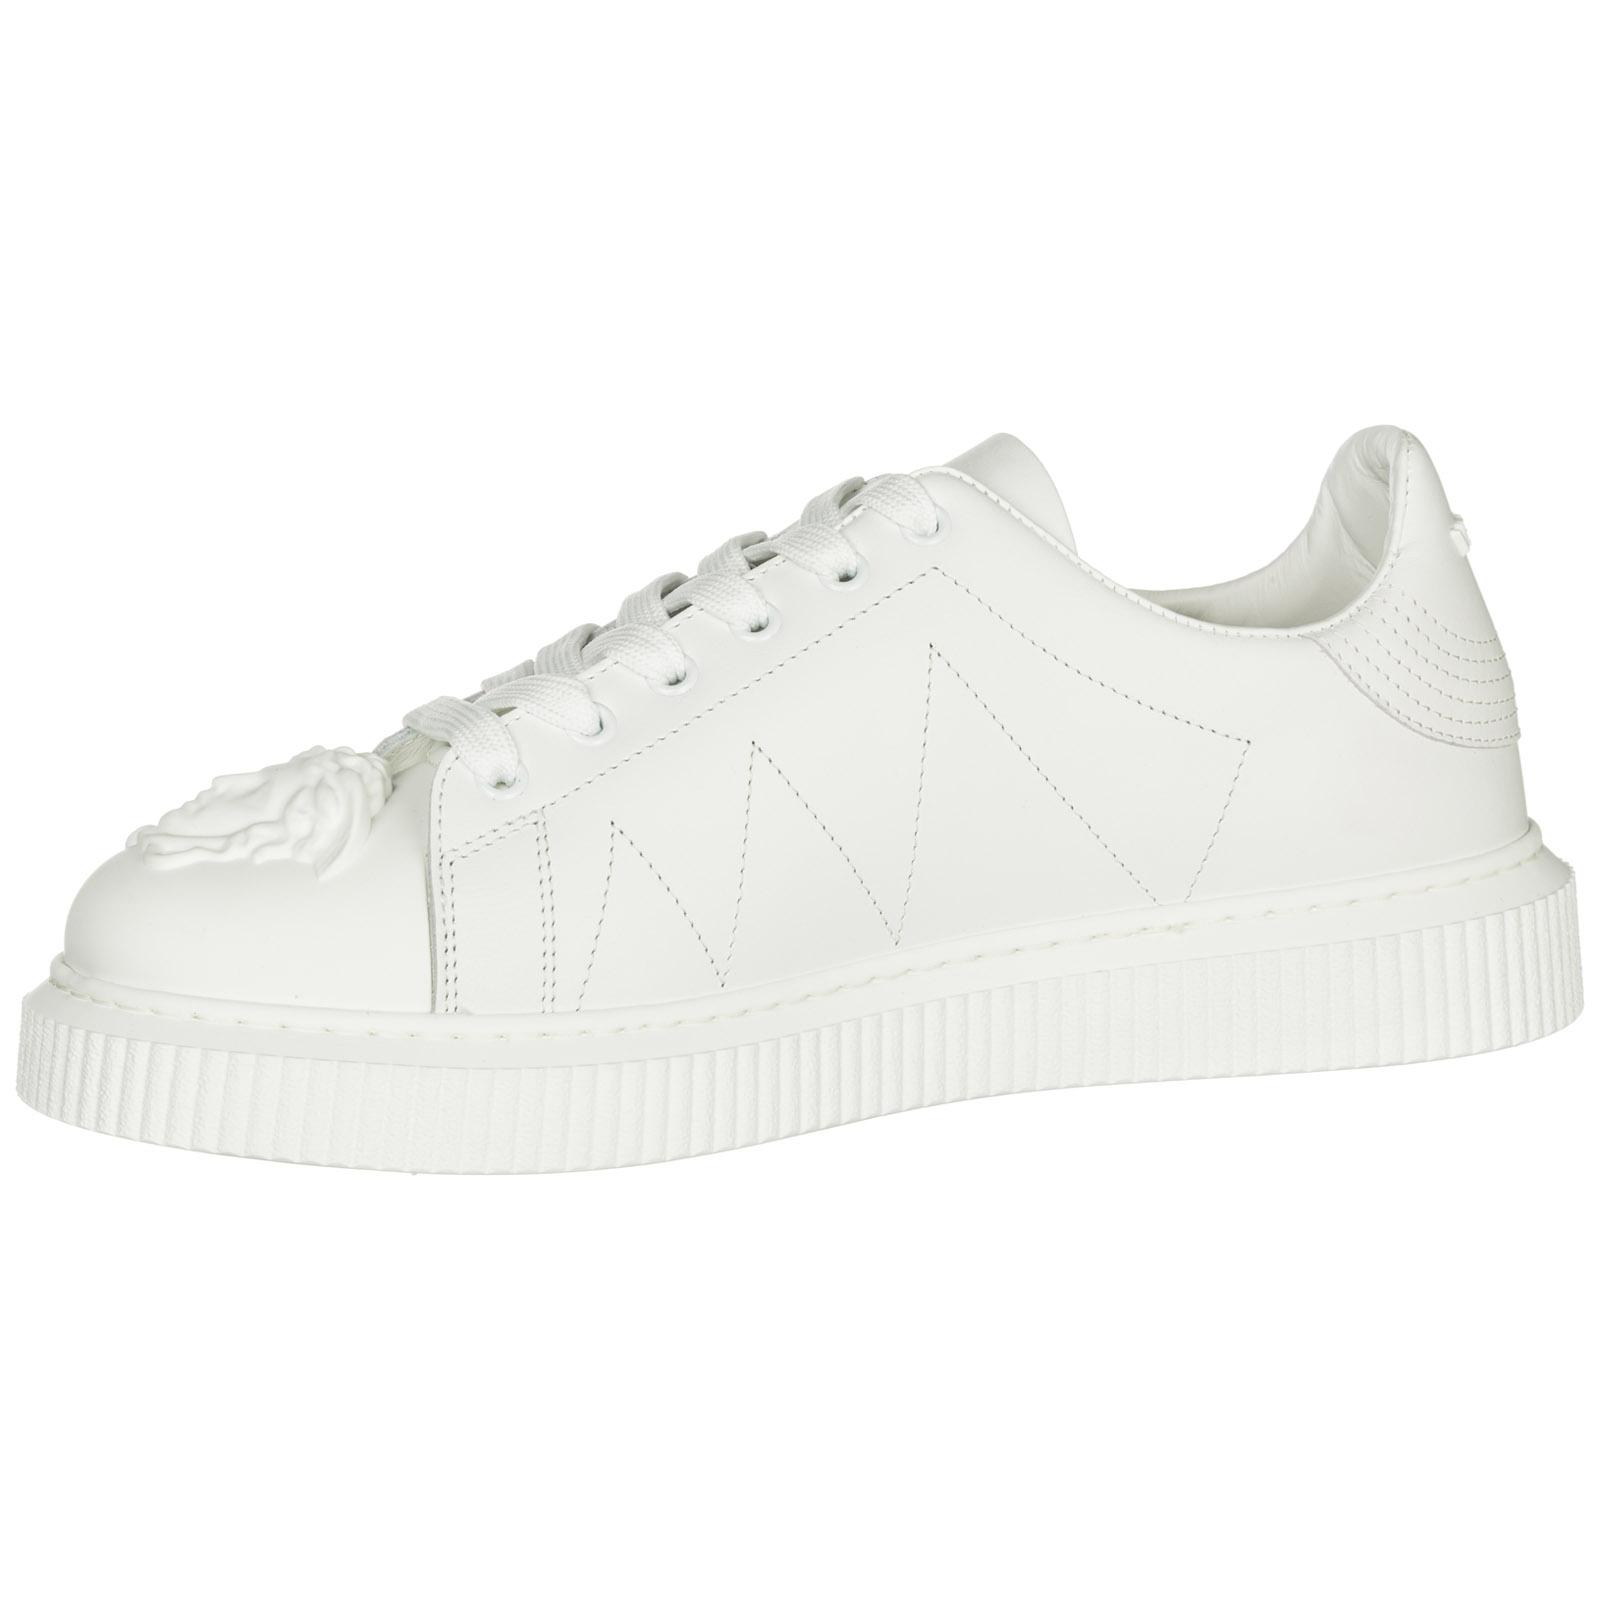 Versace Men's Shoes Leather Sneakers Medusa in White for Men